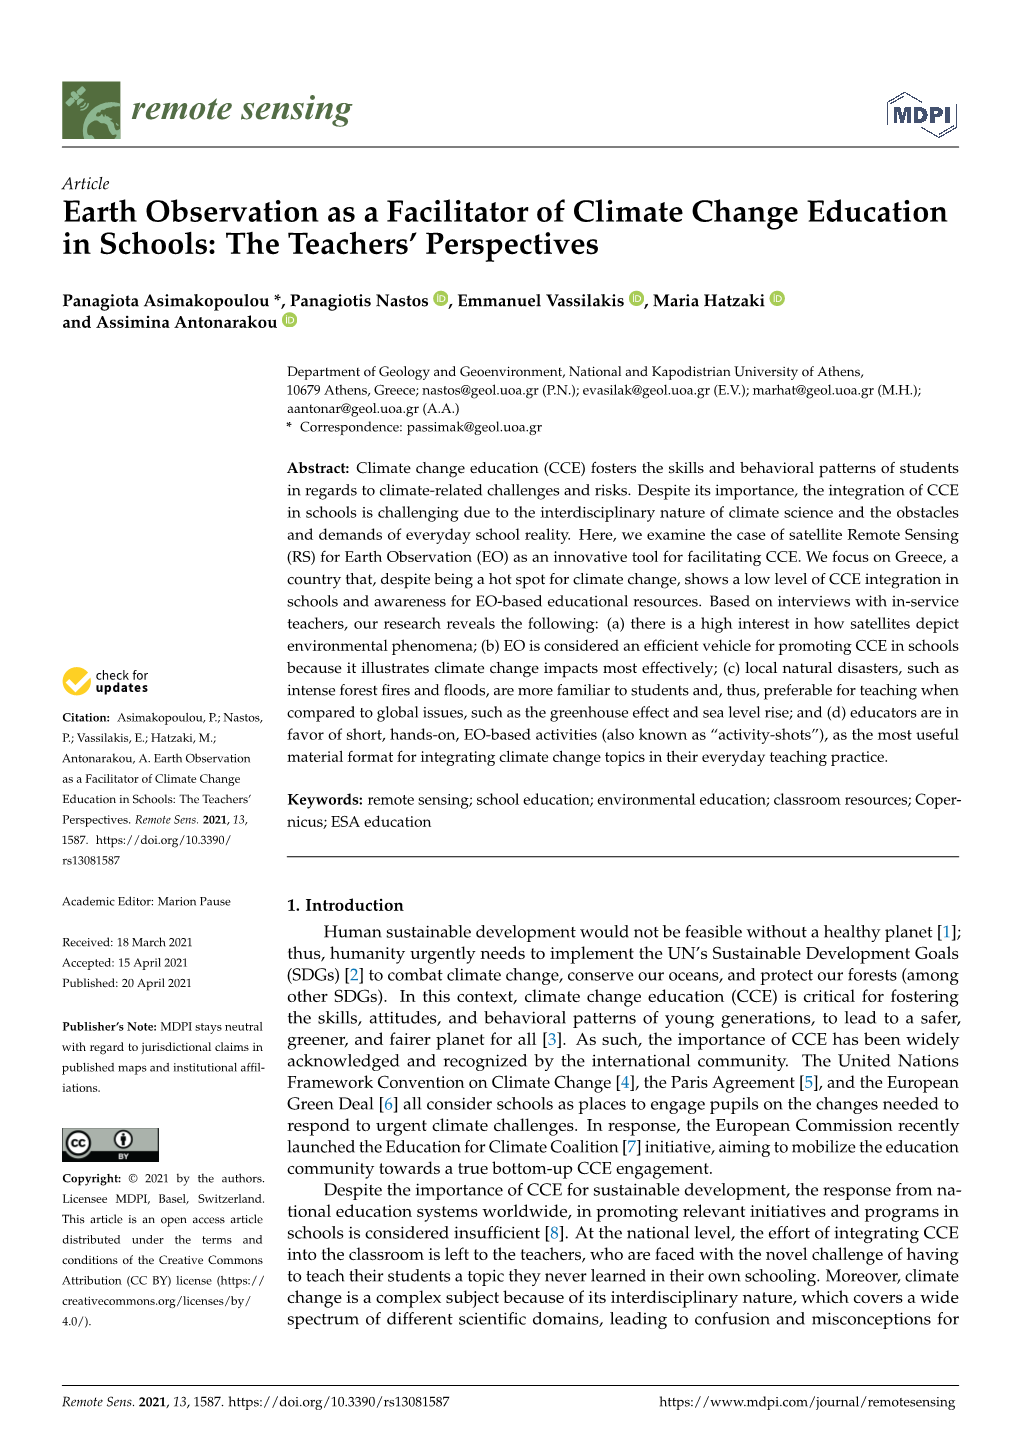 Earth Observation As a Facilitator of Climate Change Education in Schools: the Teachers’ Perspectives